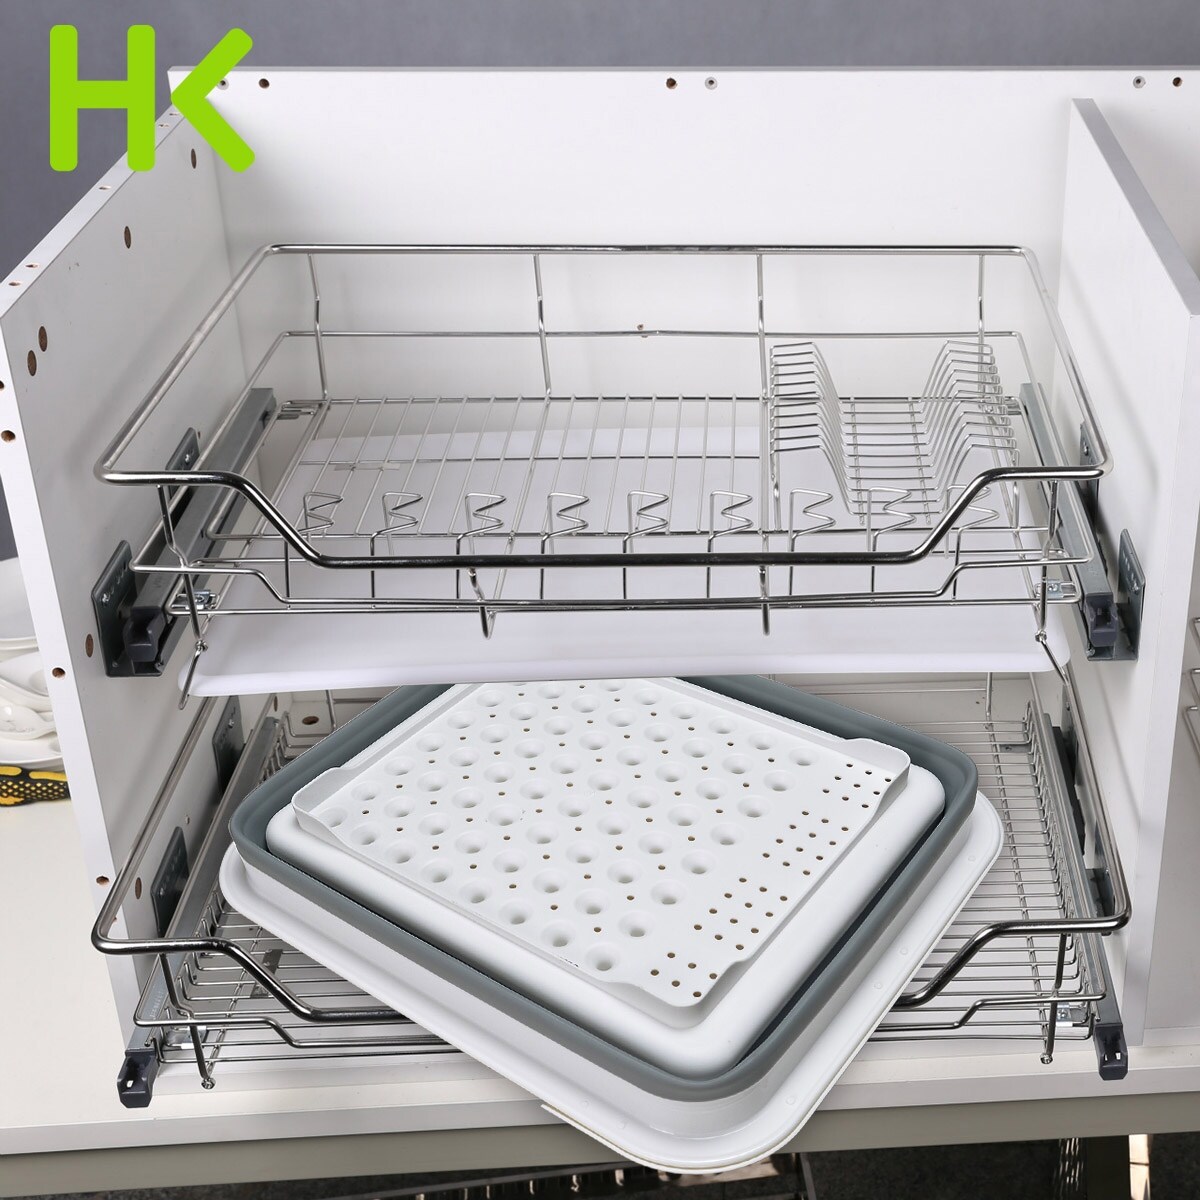 https://ak1.ostkcdn.com/images/products/is/images/direct/4be811e2580d9371f9cb83b980e6e82b6d6b3d39/HK-Dish-Drying-Rack-Dish-Drainer-w-Utensil-Holder-Antimicrobial-Multi-function-Foldable.jpg